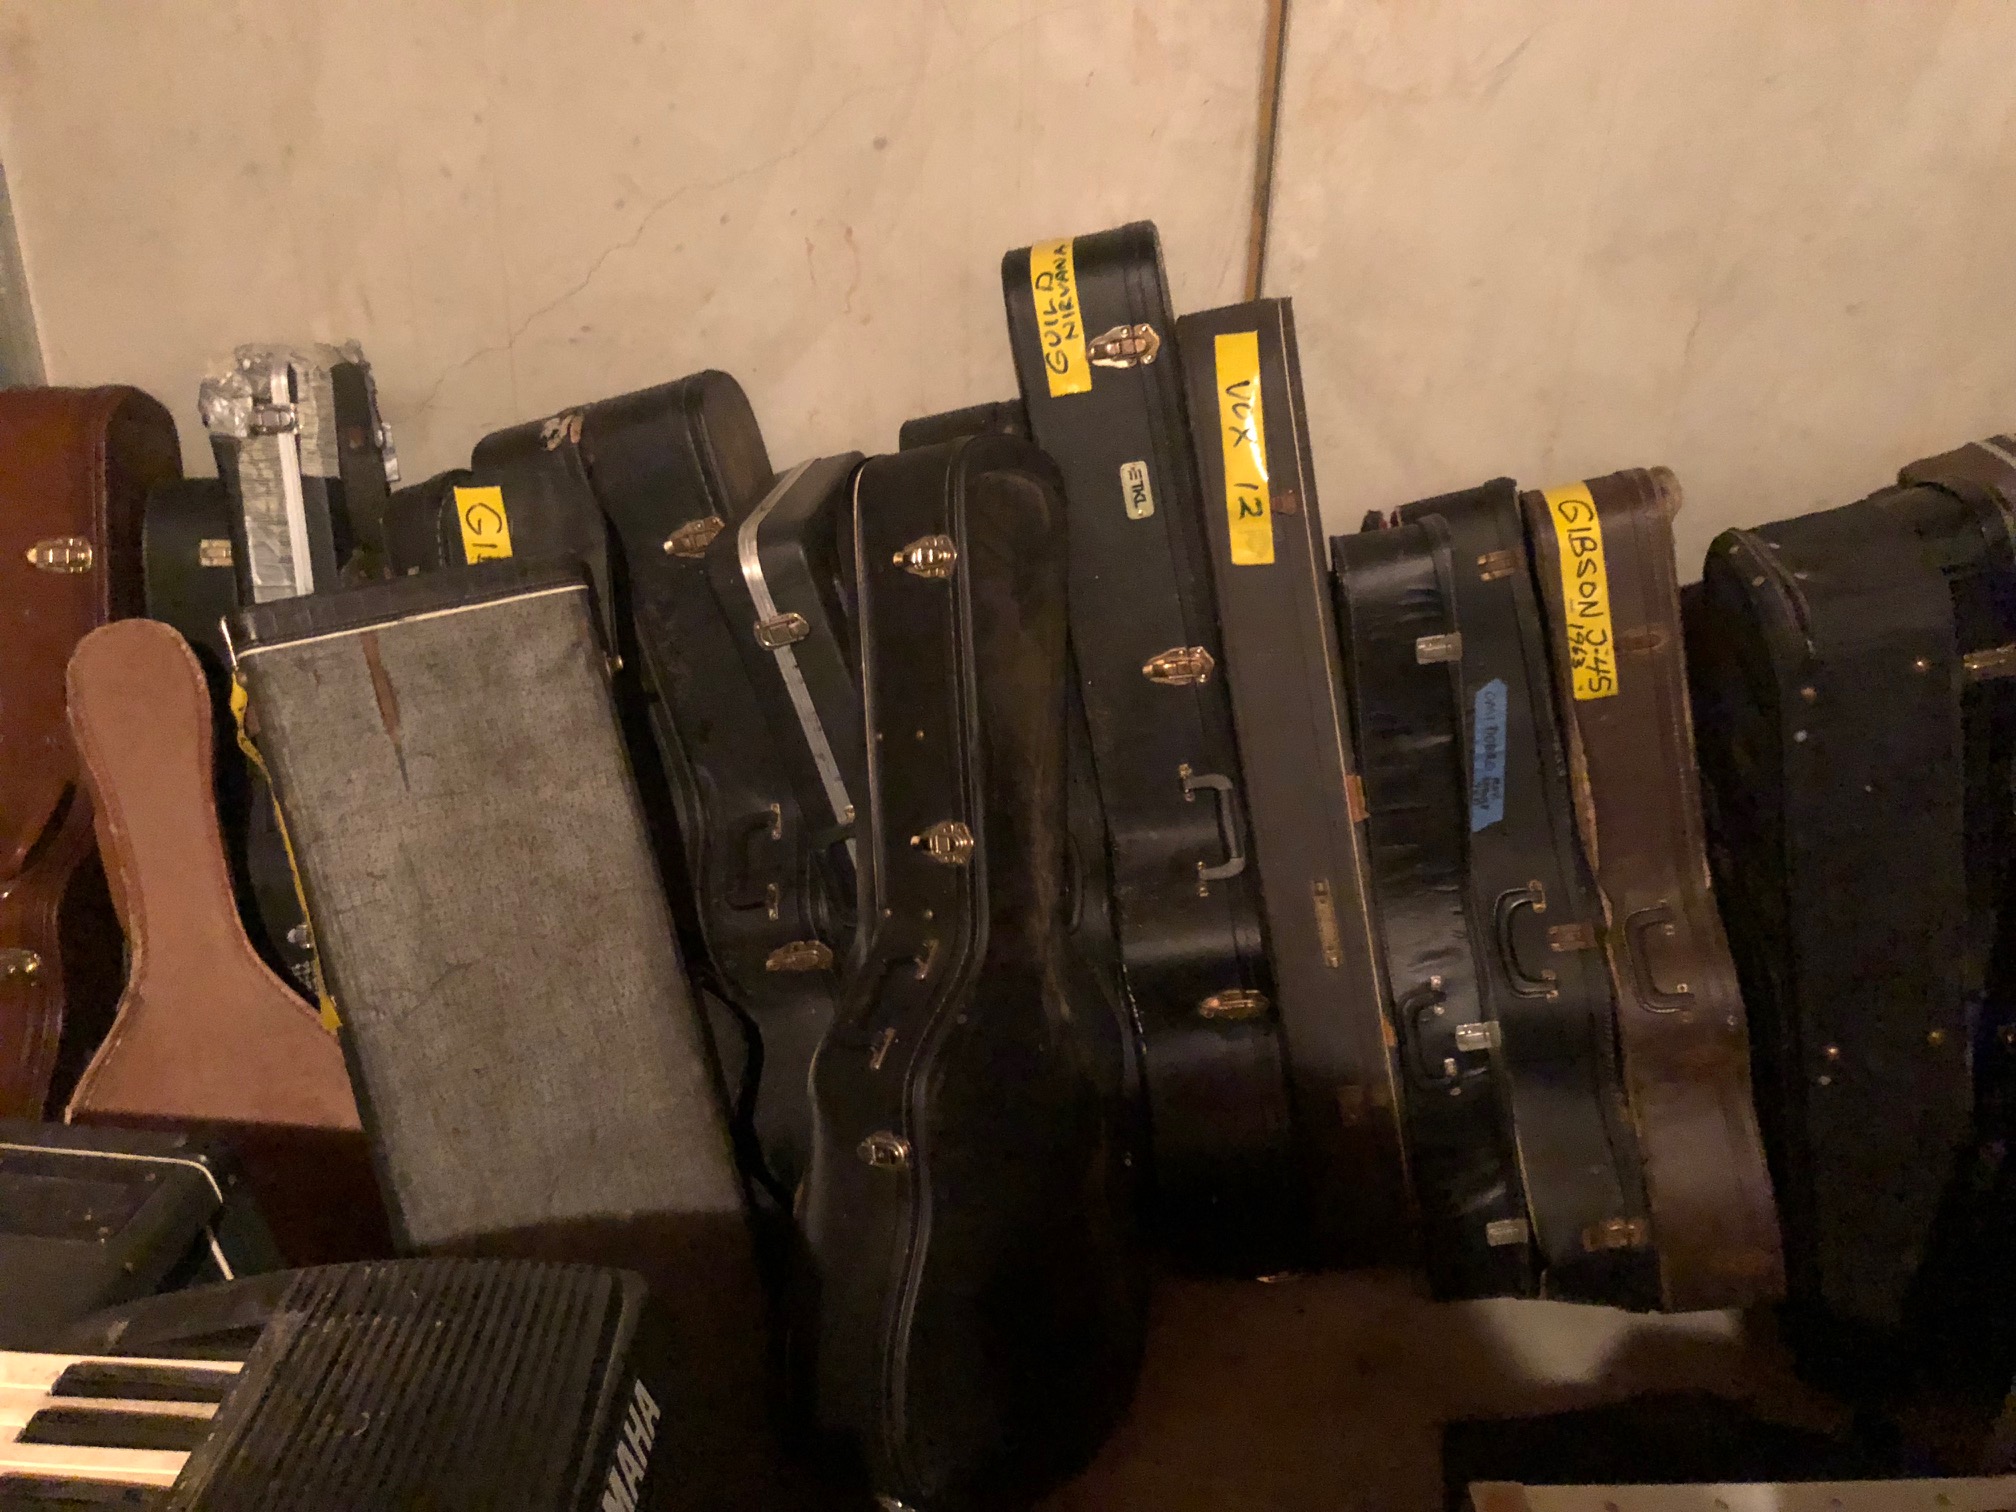 entire back wall labeled guitars cases - all empty